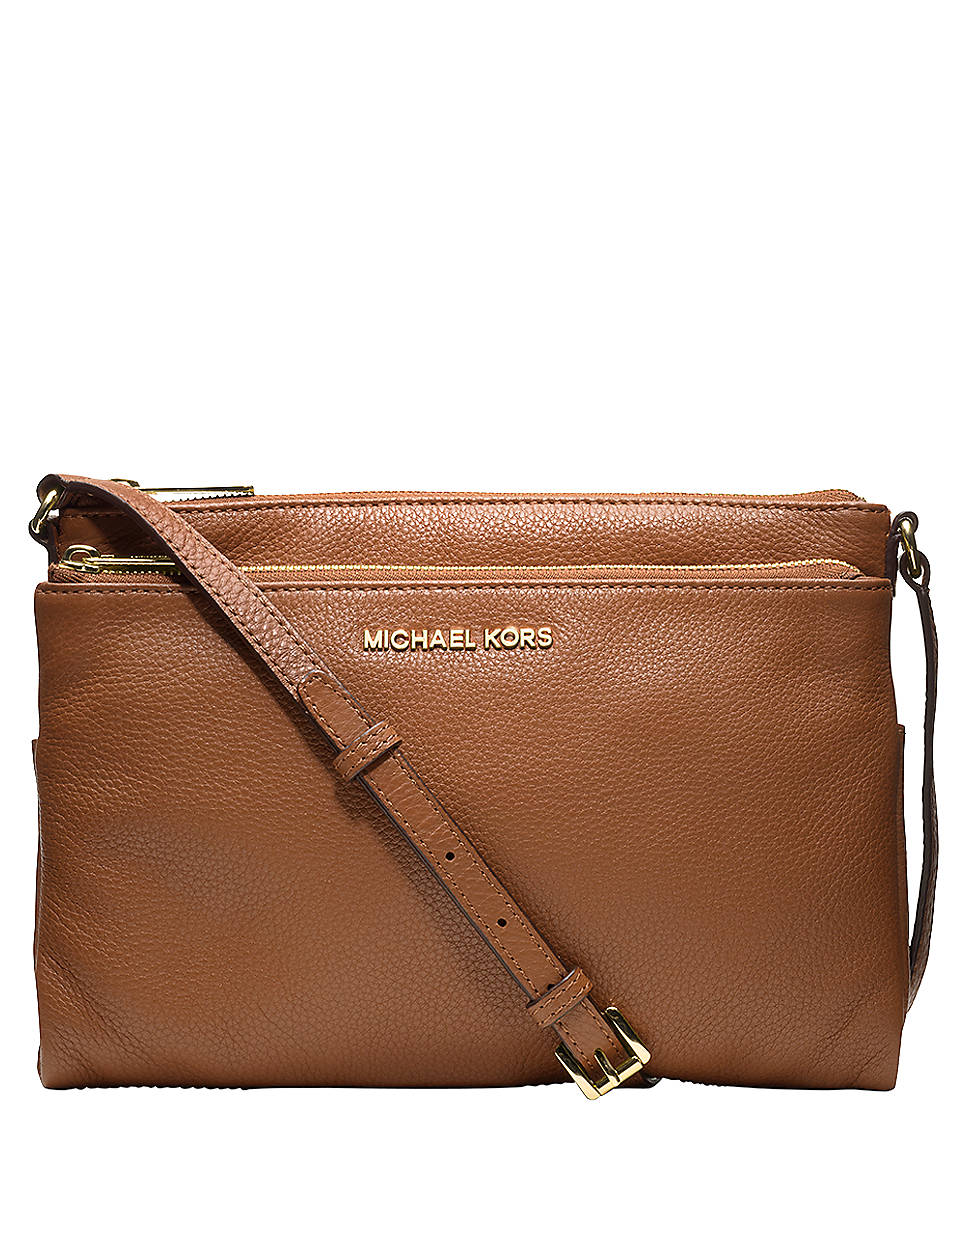 Michael Michael Kors Bedford Leather Extra Large Crossbody Bag in Brown | Lyst